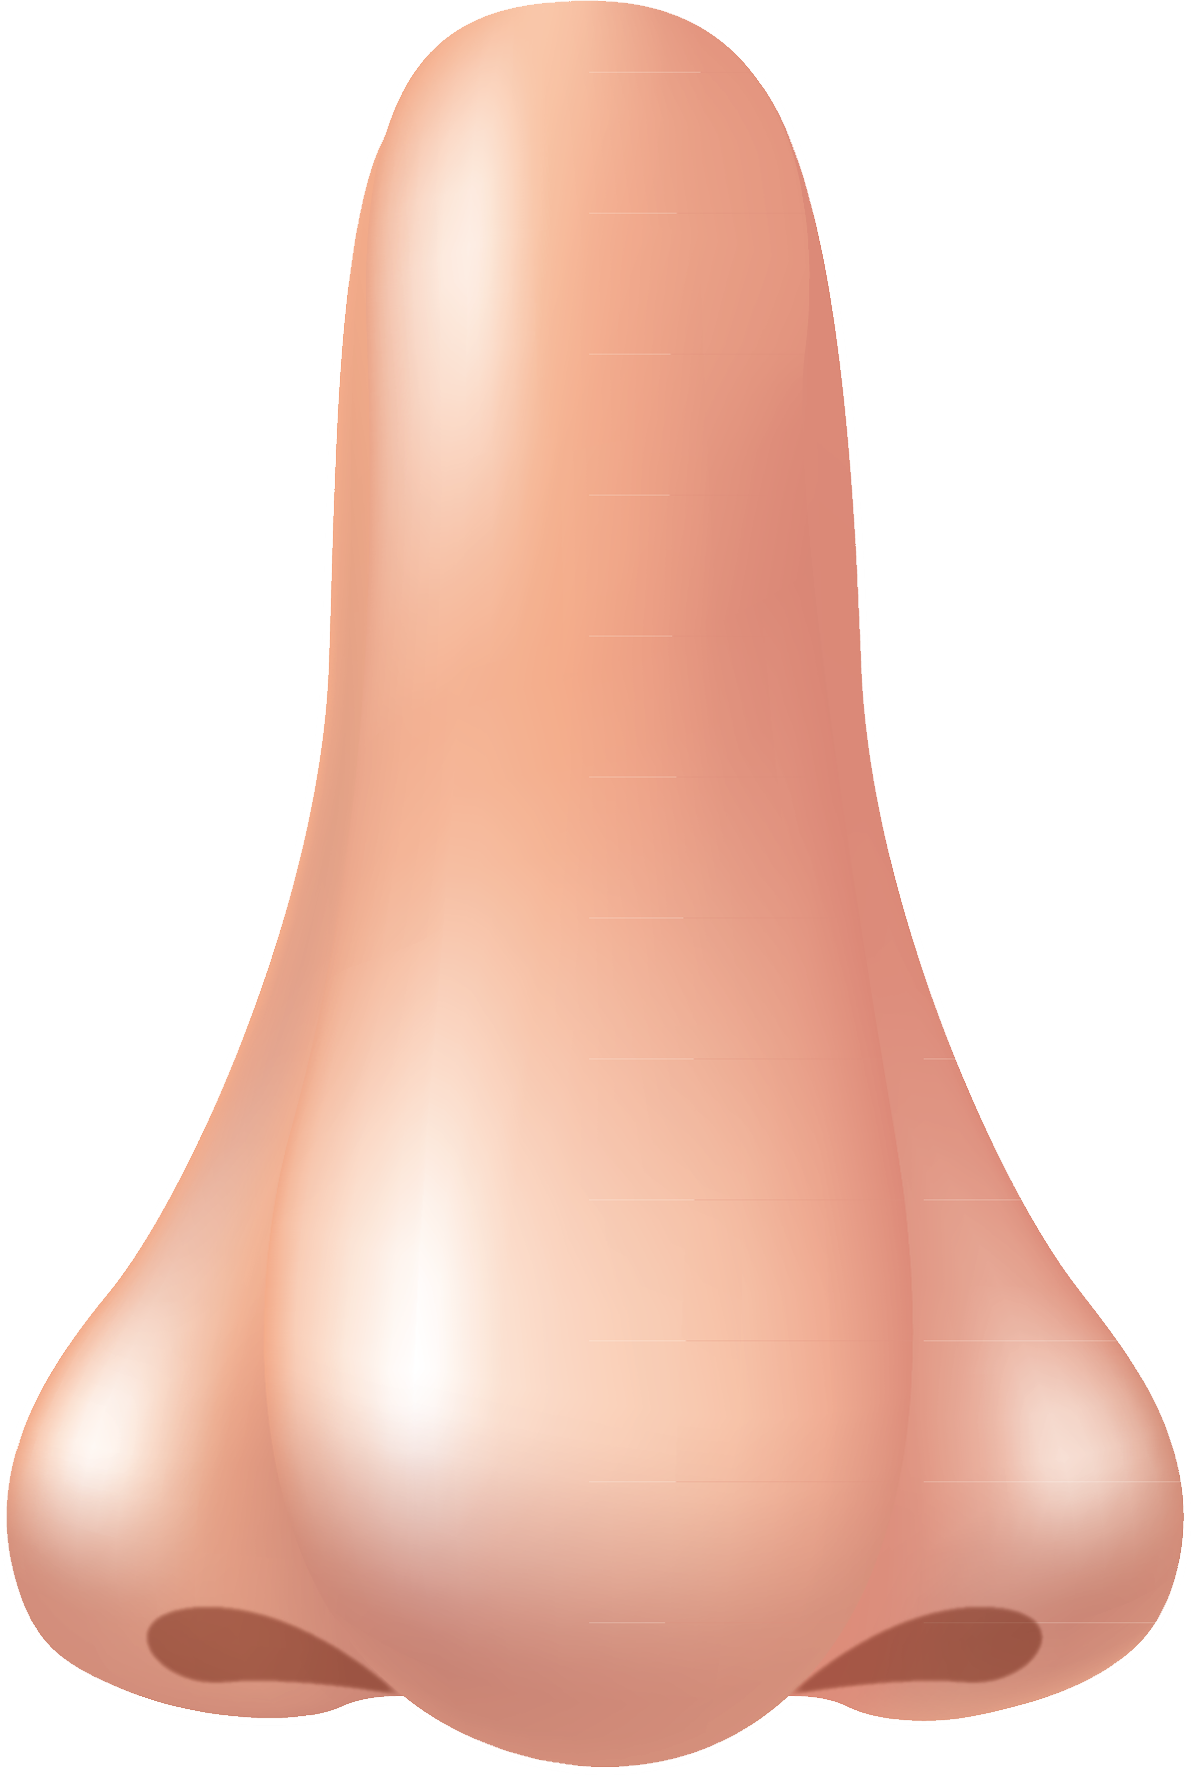 picture clipart nose